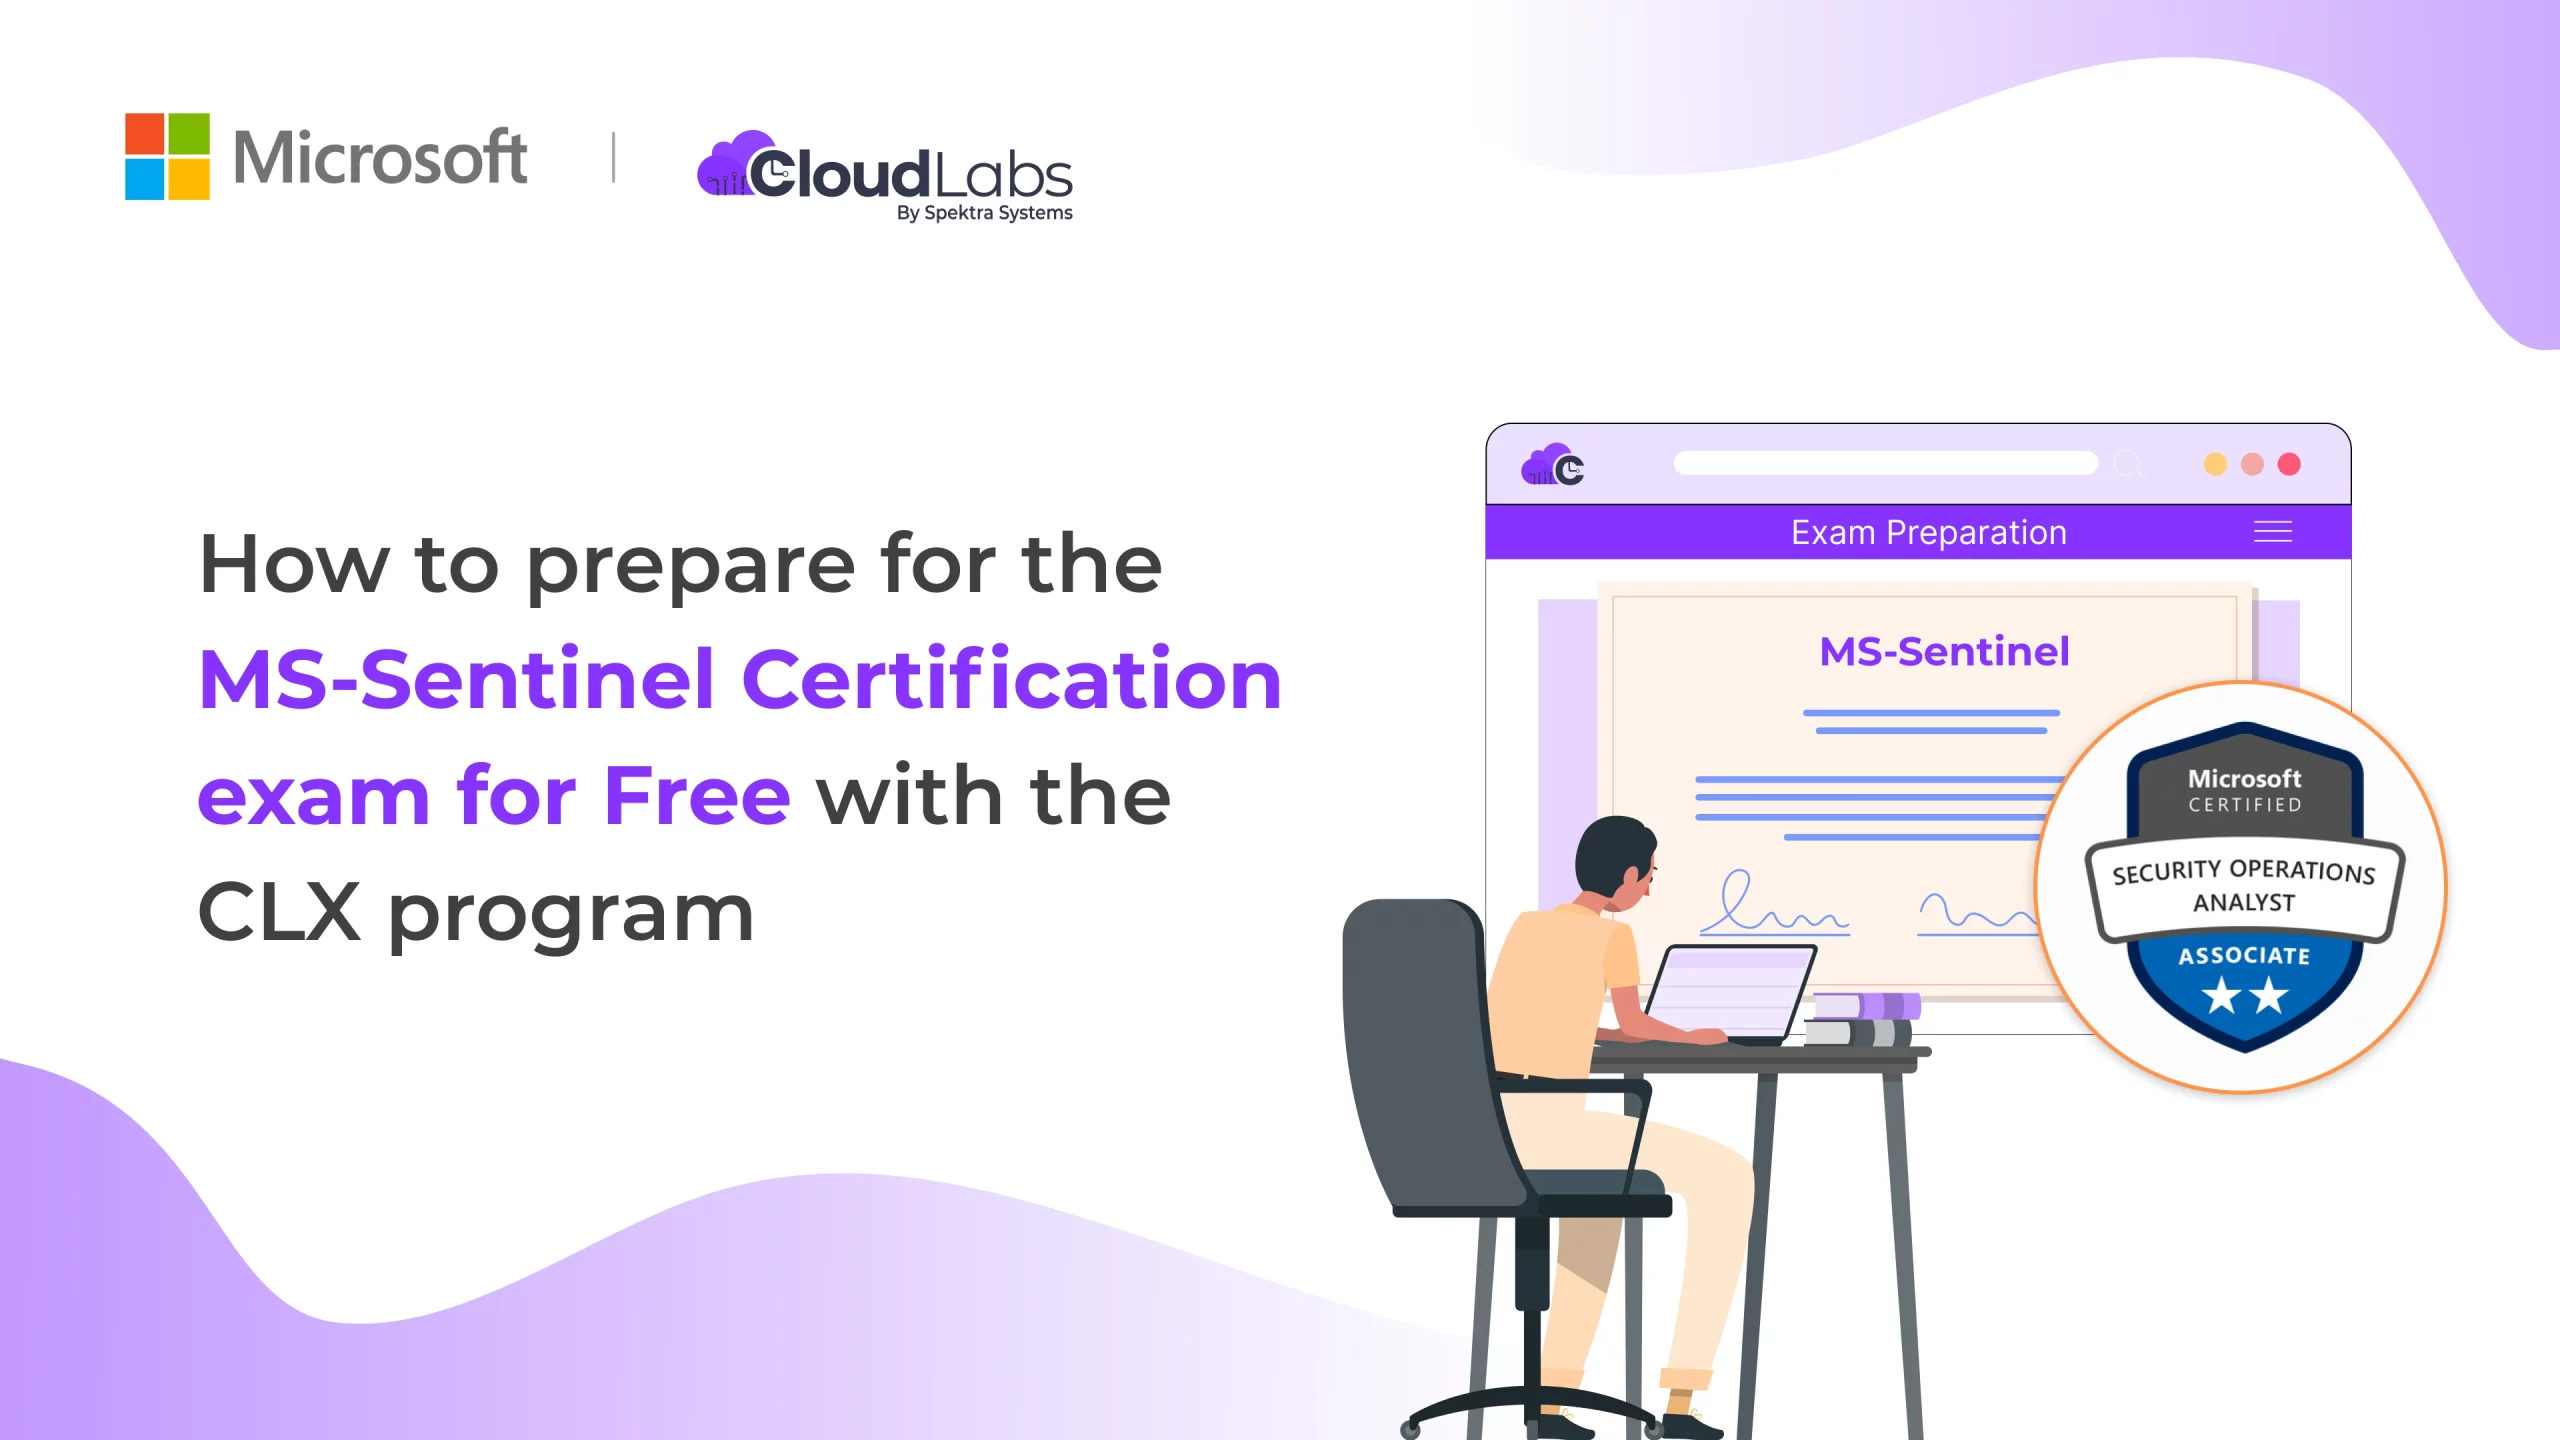 How to prepare for the MS-Sentinel Certification exam for Free with the CLX program